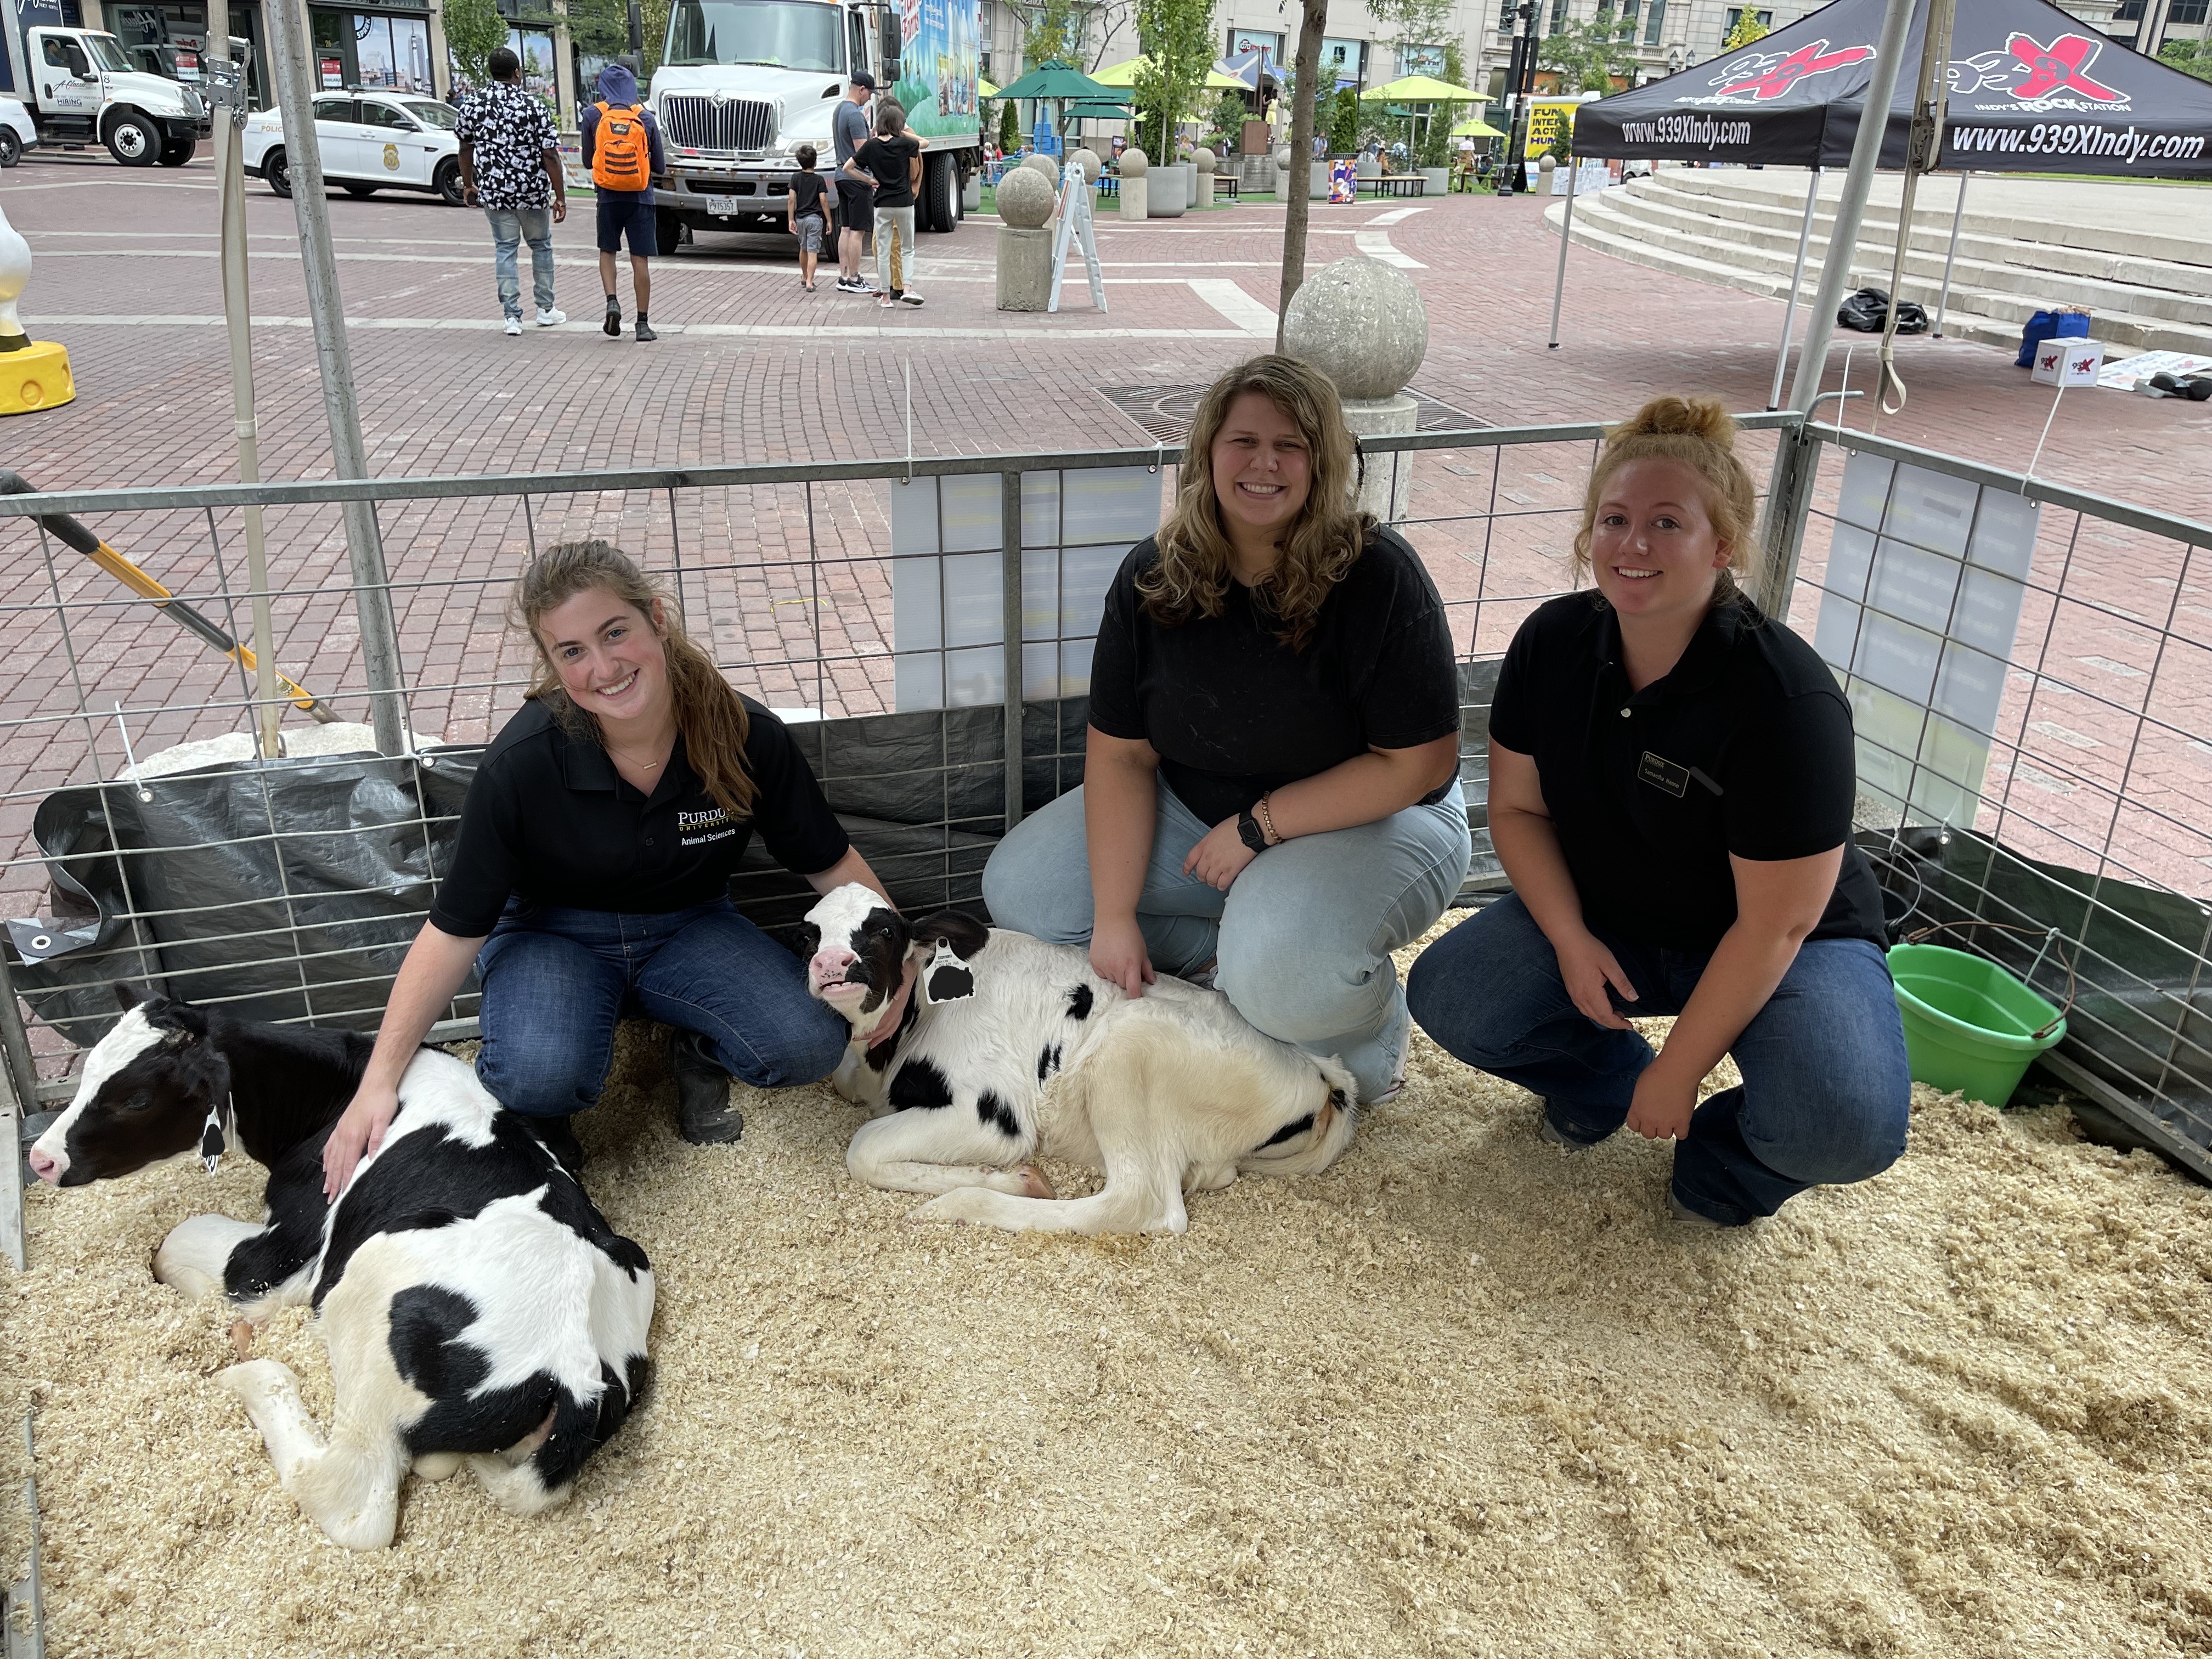 Three students with two dairy calves at a fundraiser event